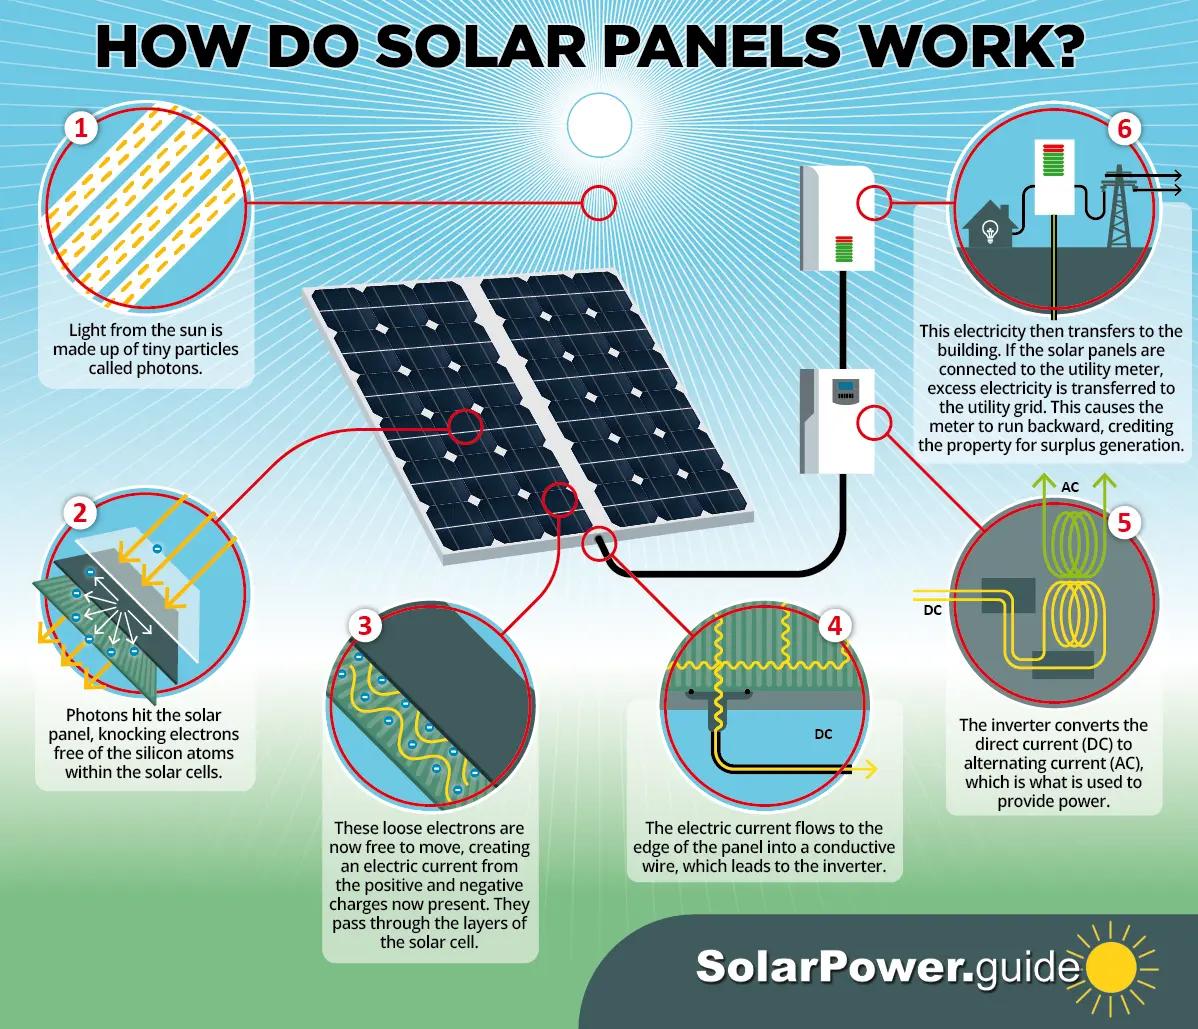 how does solar panels work - How do solar panels actually work